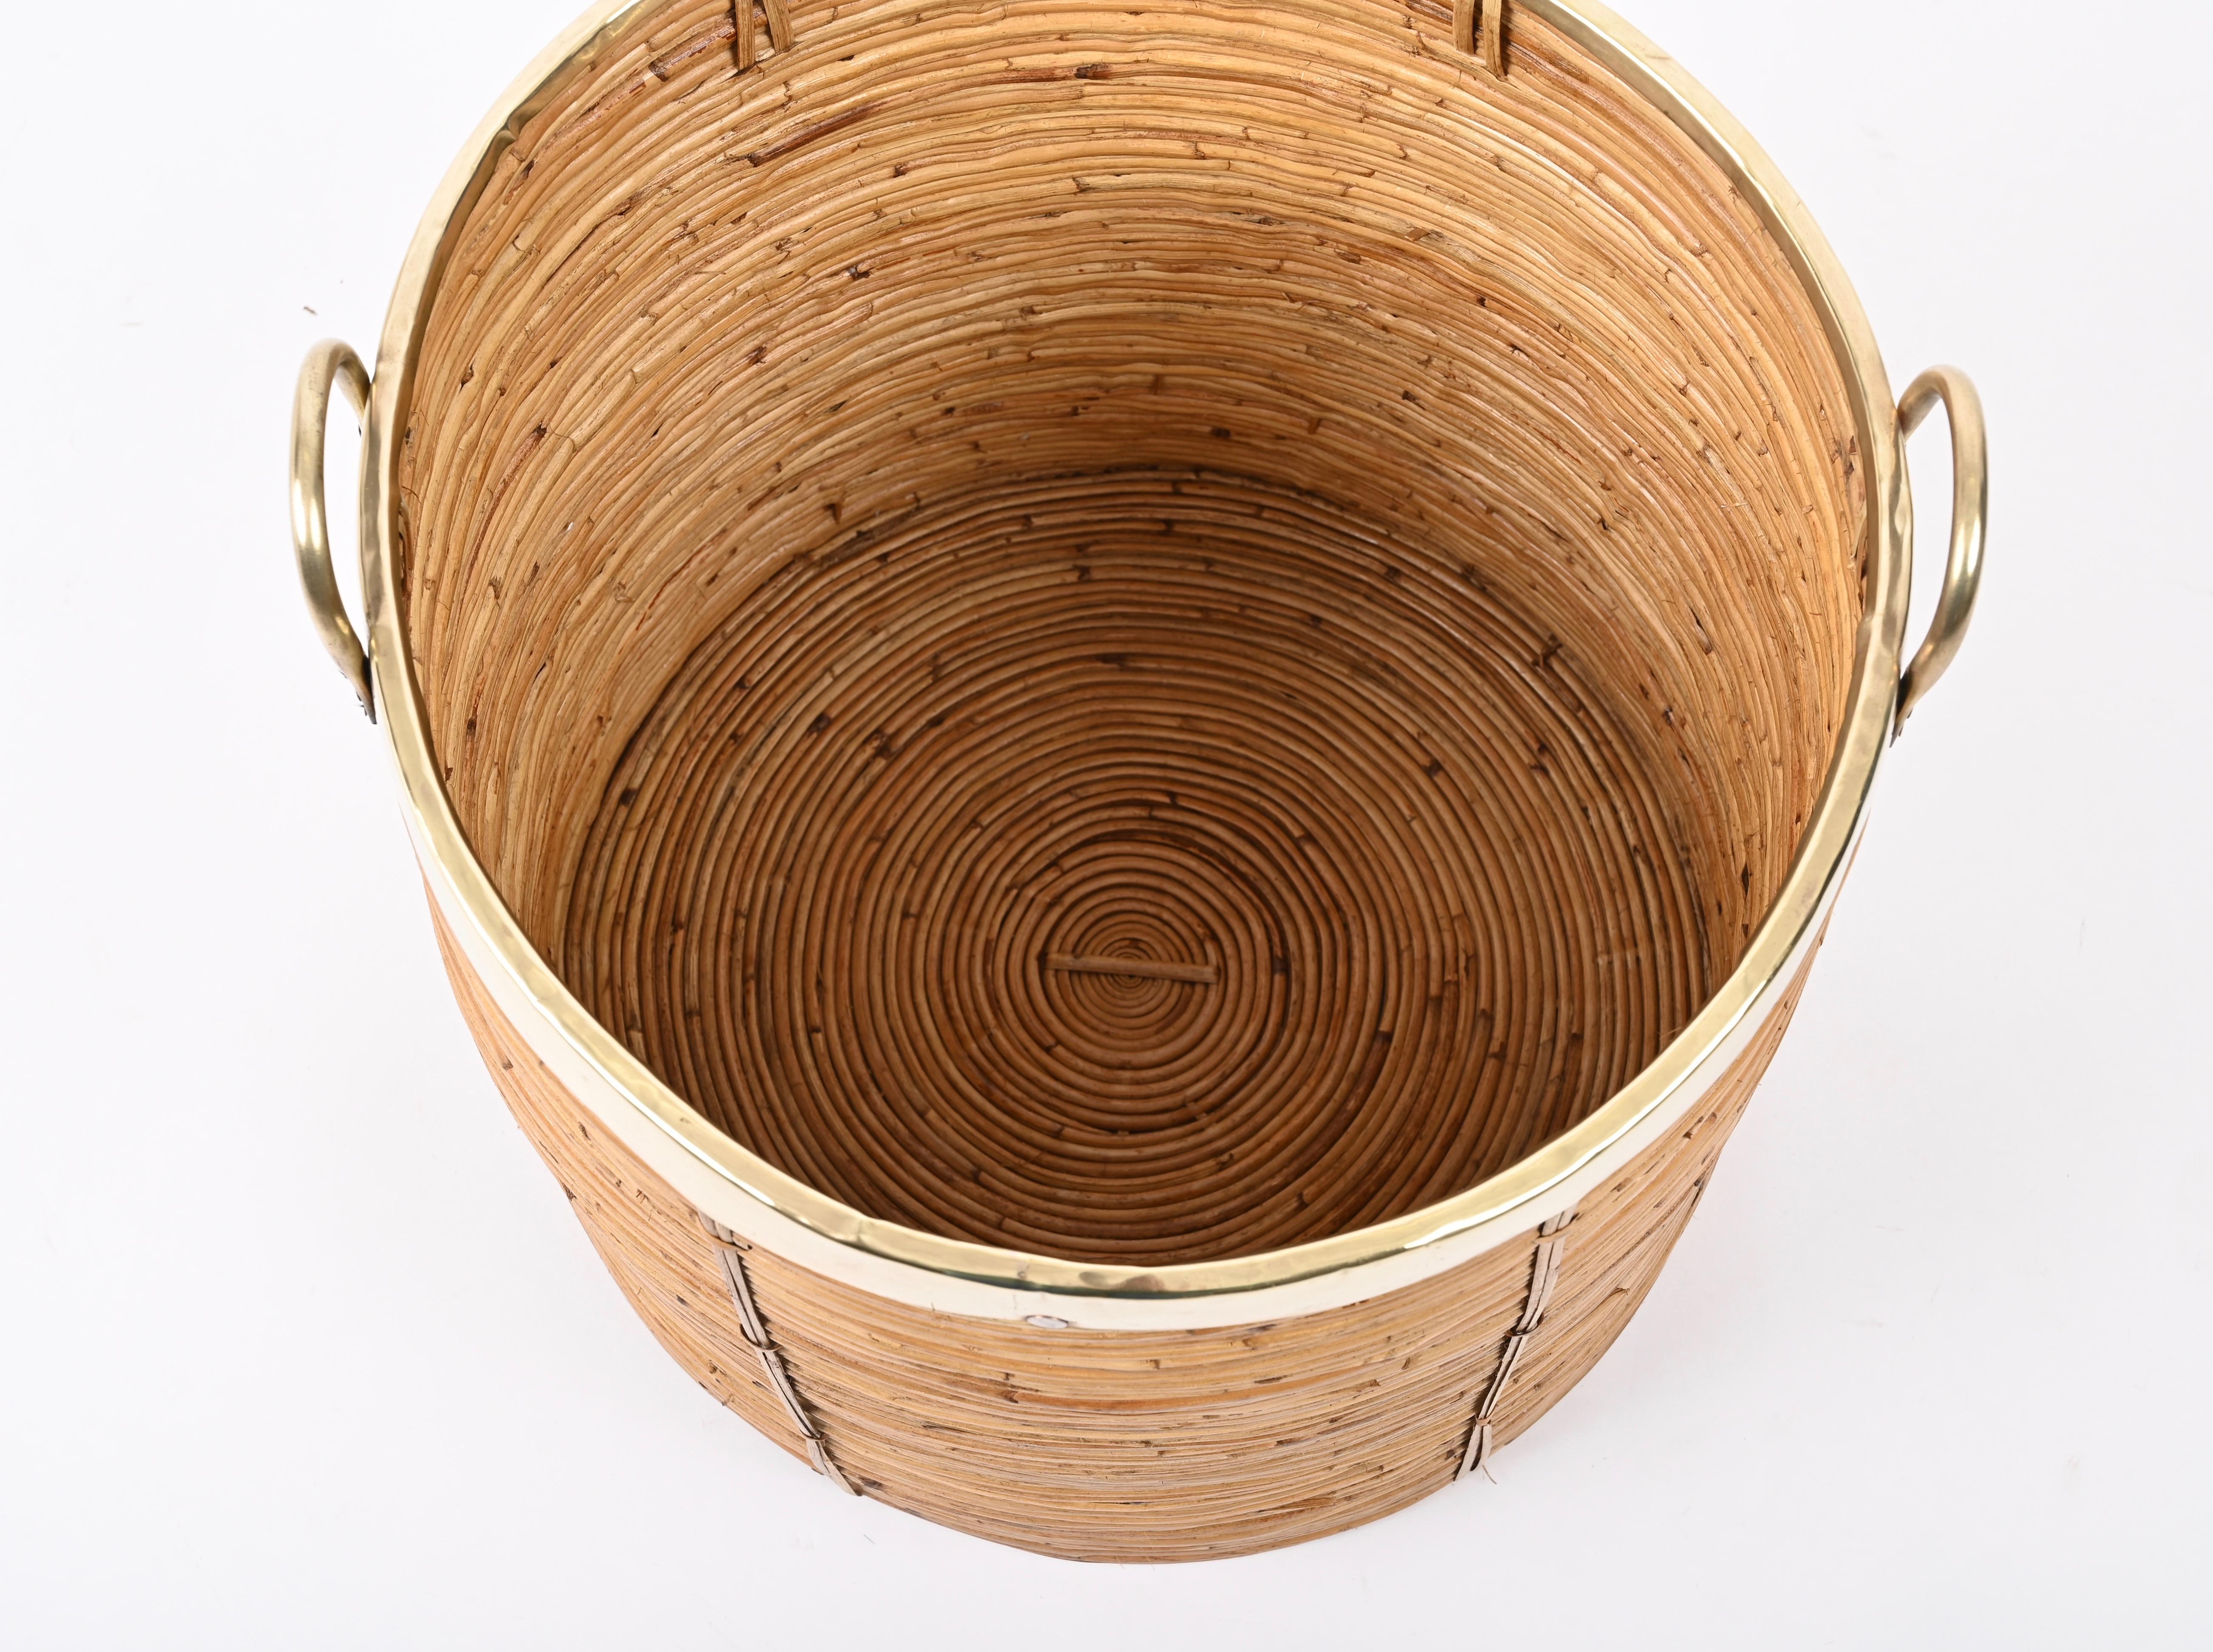 Midcentury Curved Rattan, Brass and Wicker Basket, Vivai del Sud, Italy 1970s For Sale 8